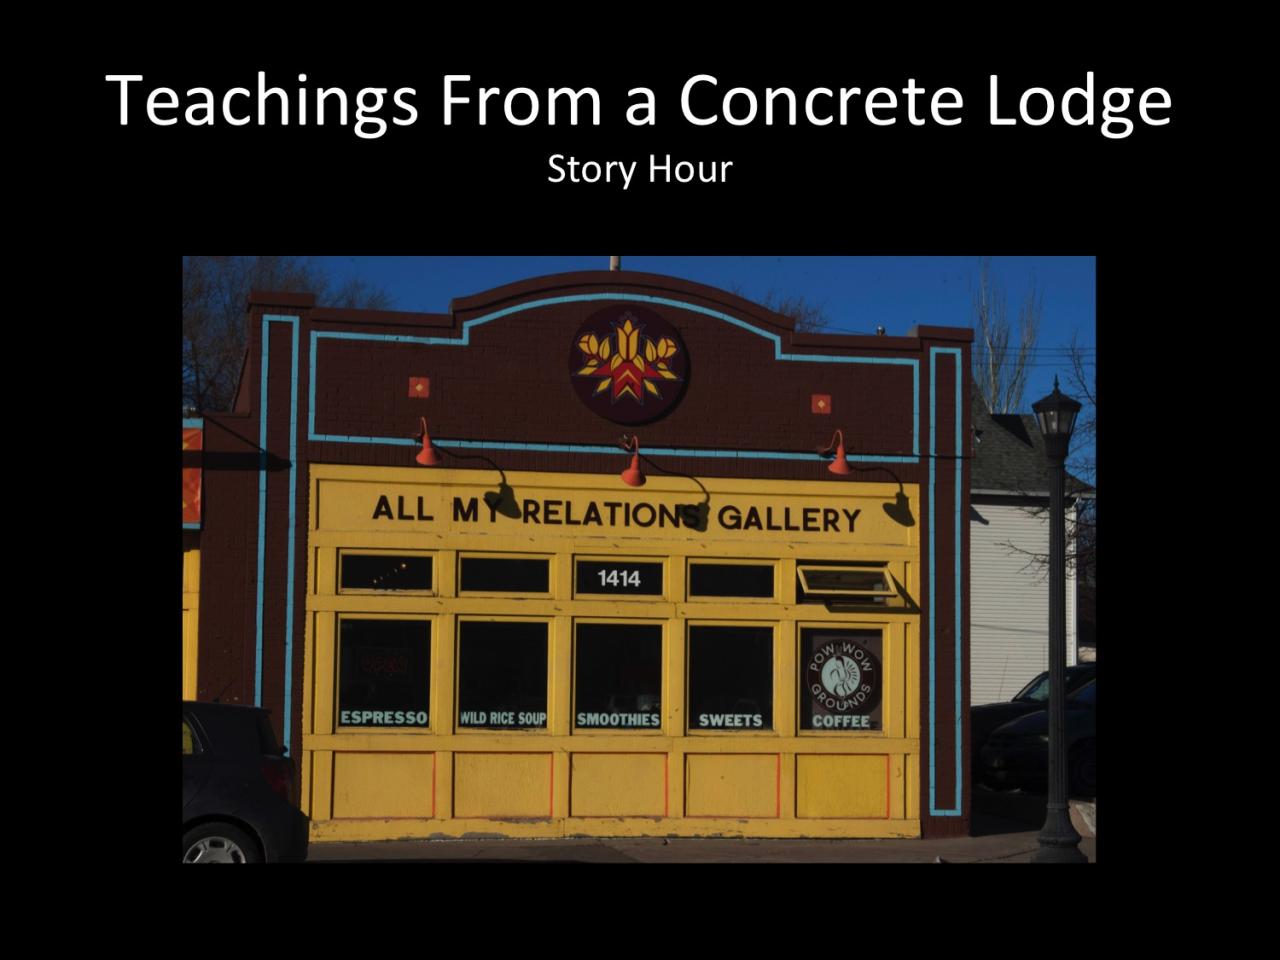 Presentation for "Teachings From a Concrete Lodge."